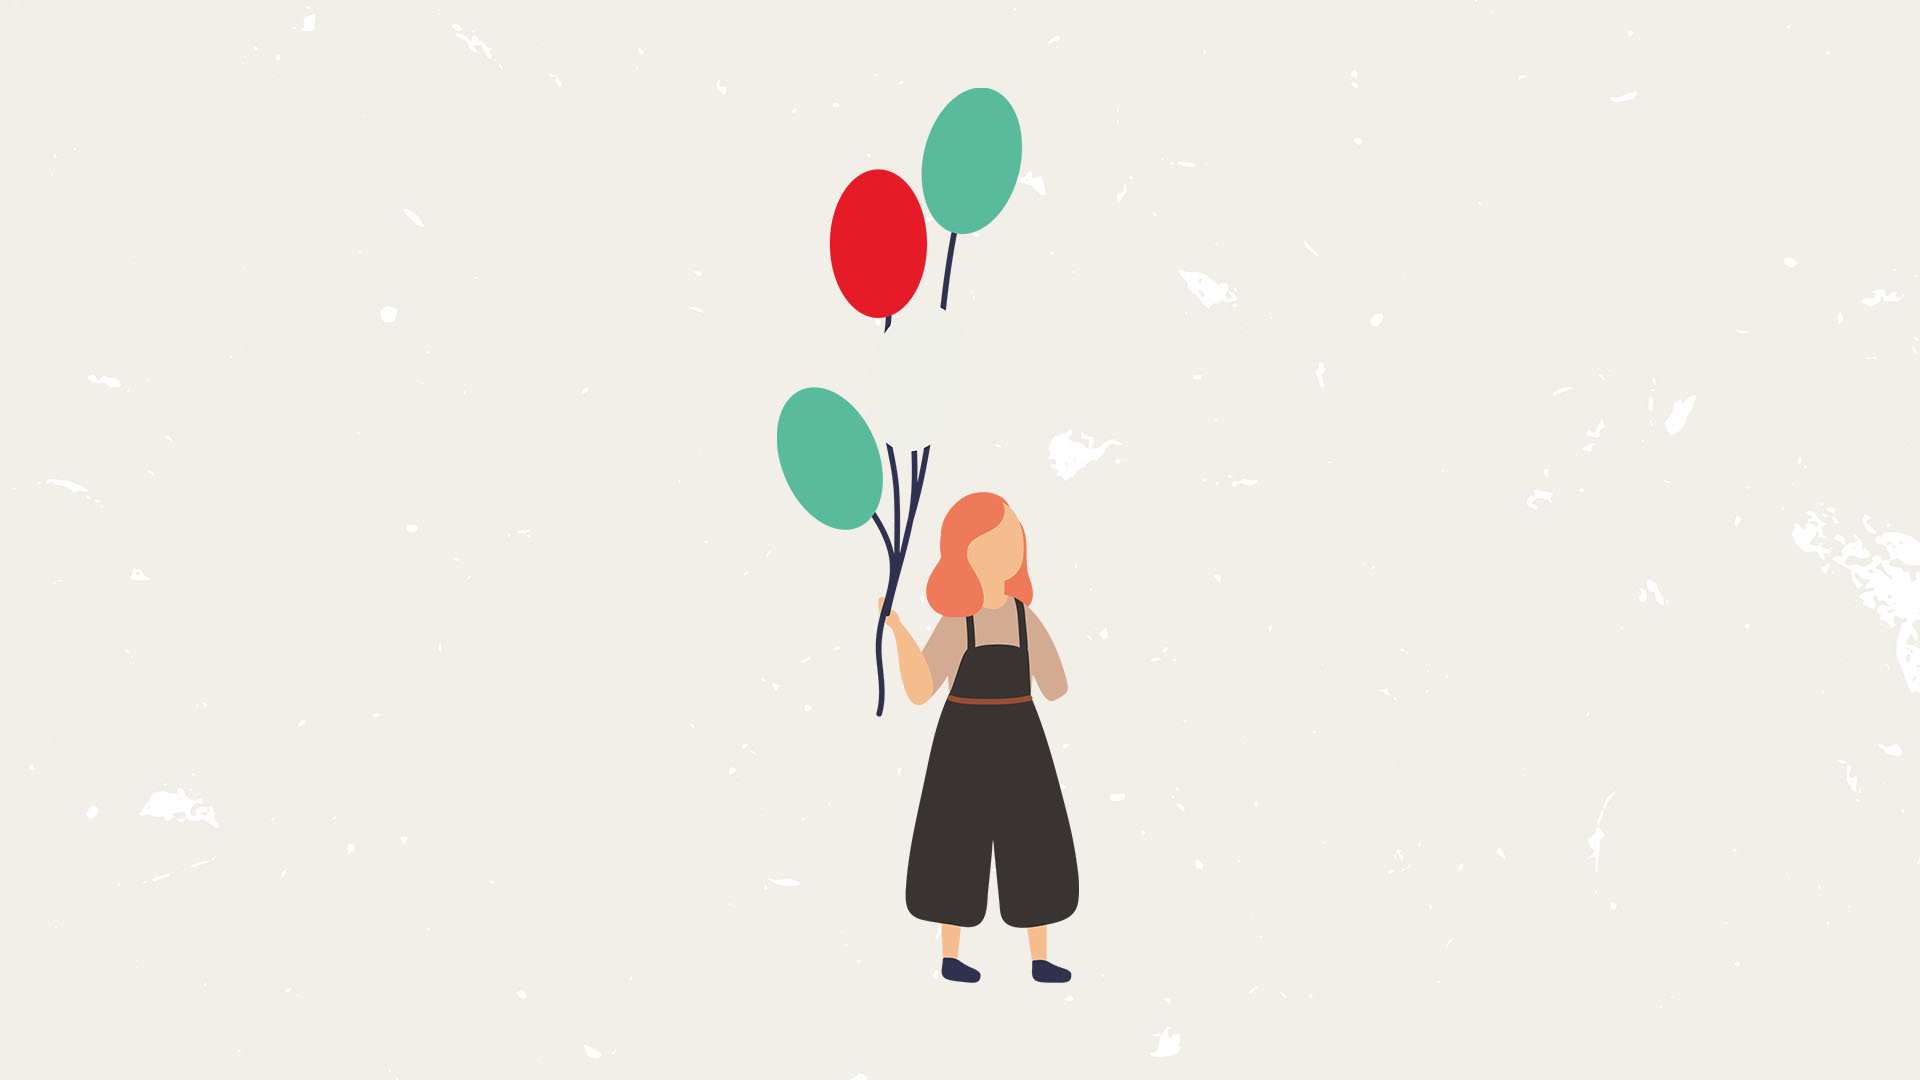 Woman carrying balloons illustration